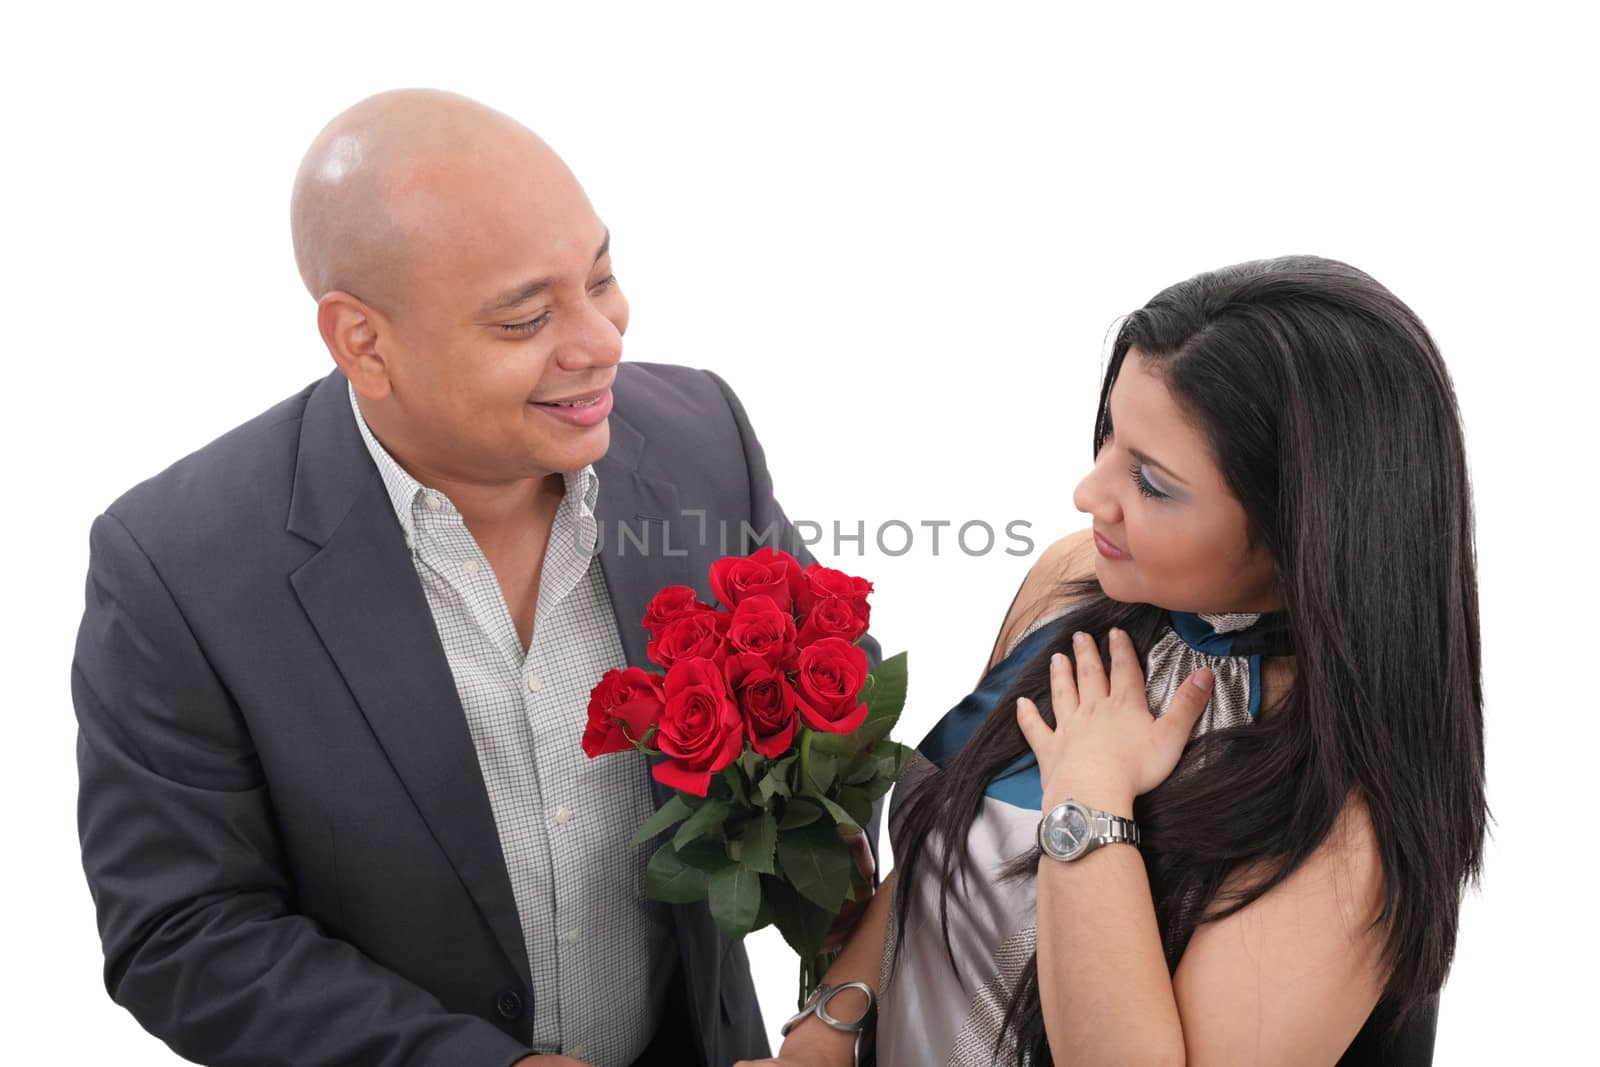 Man dating a girl giving a bouquet of flowers by dacasdo